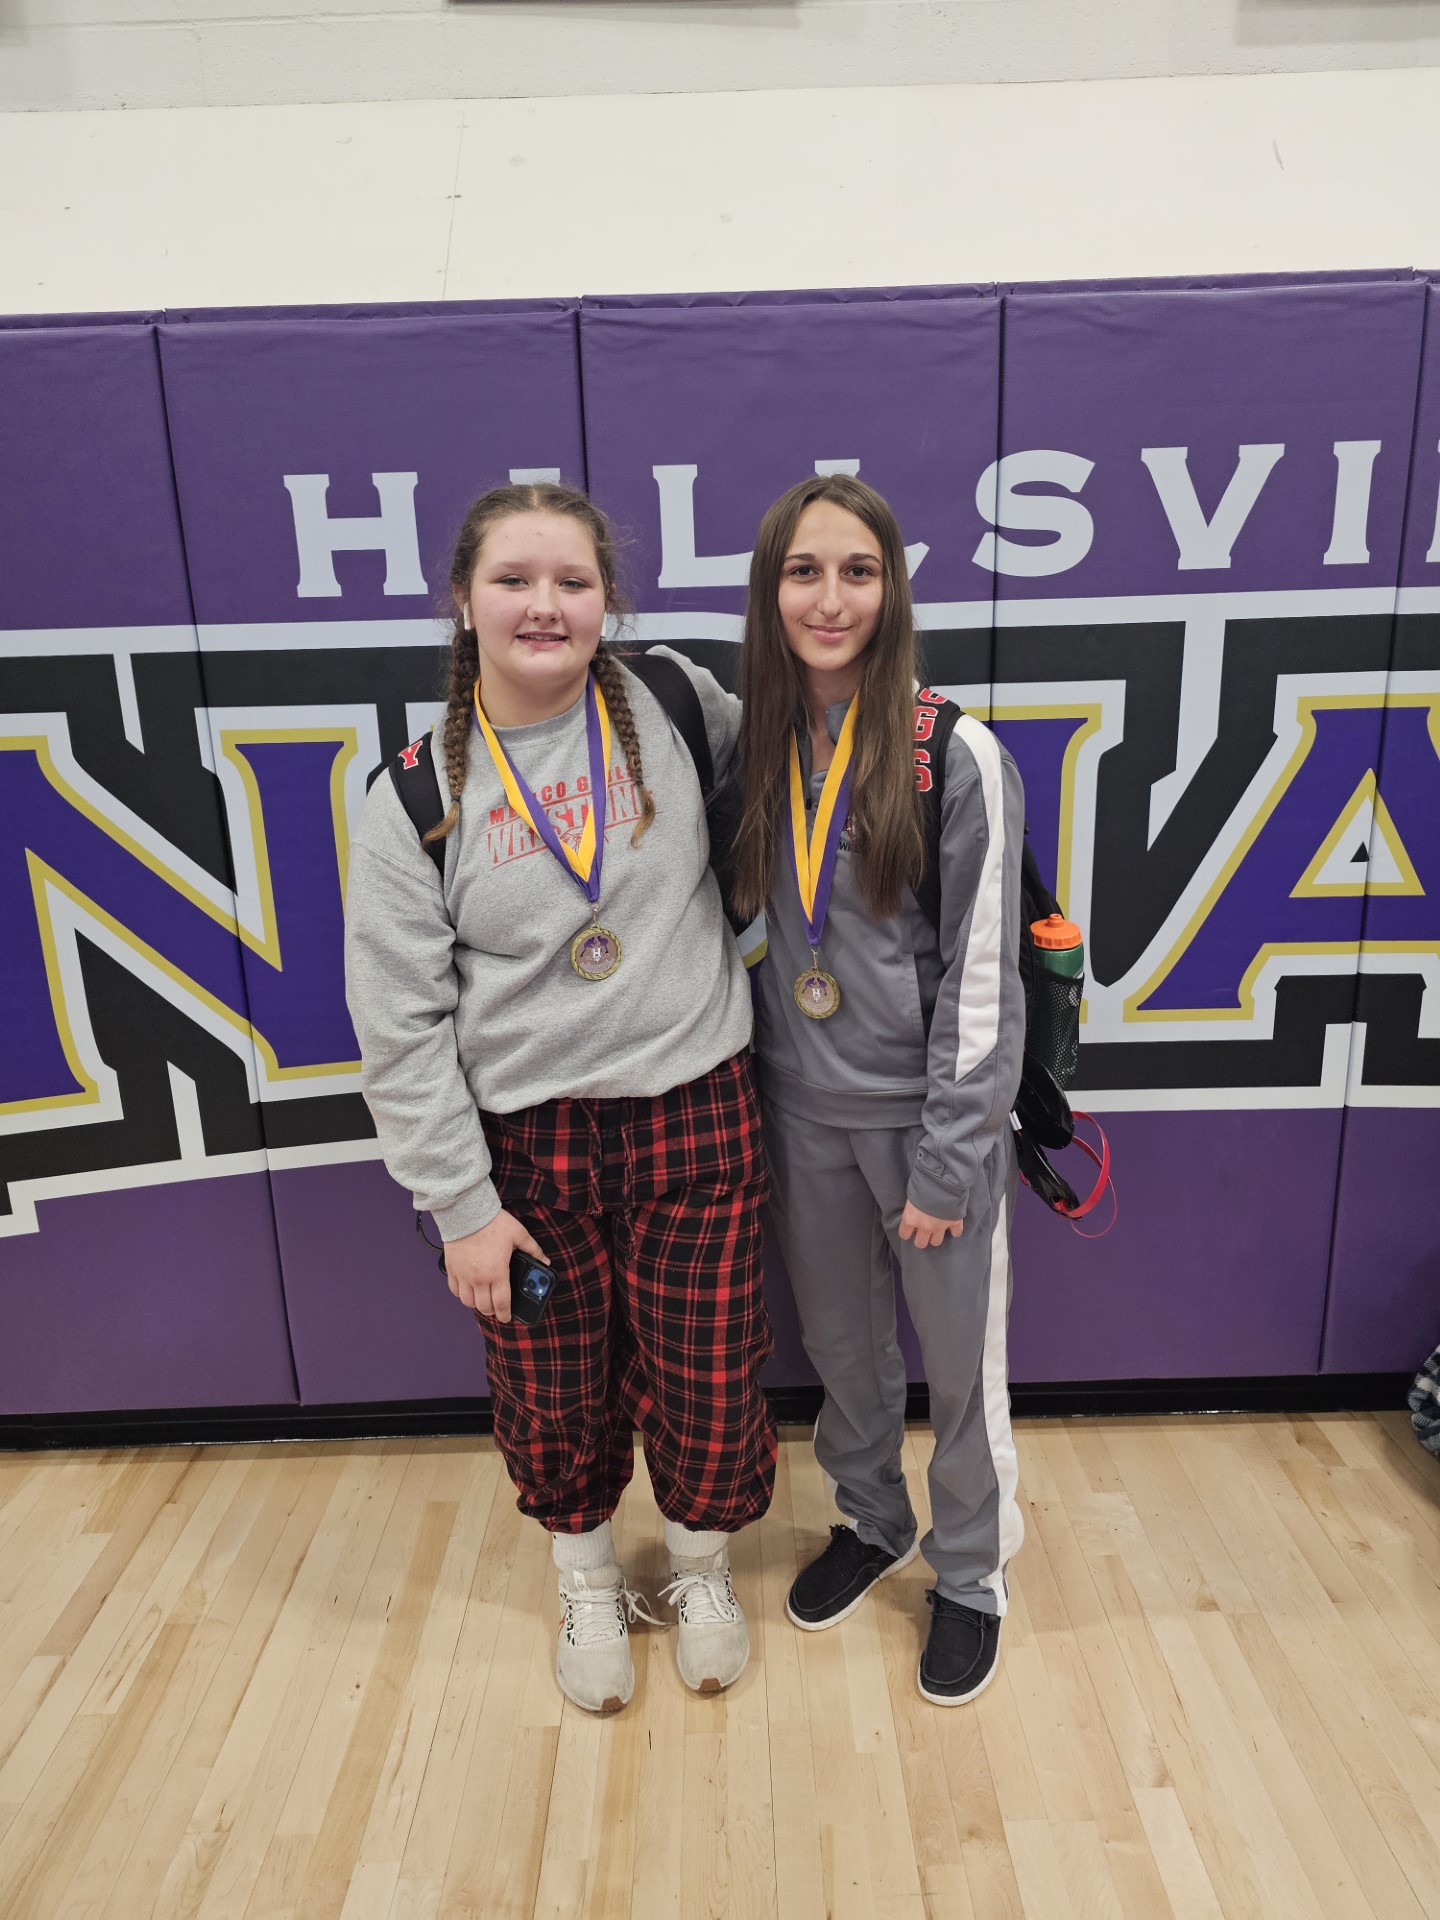 Two Mexico Lady Bulldogs Earn First Place Finishes At Hallsville Invitational